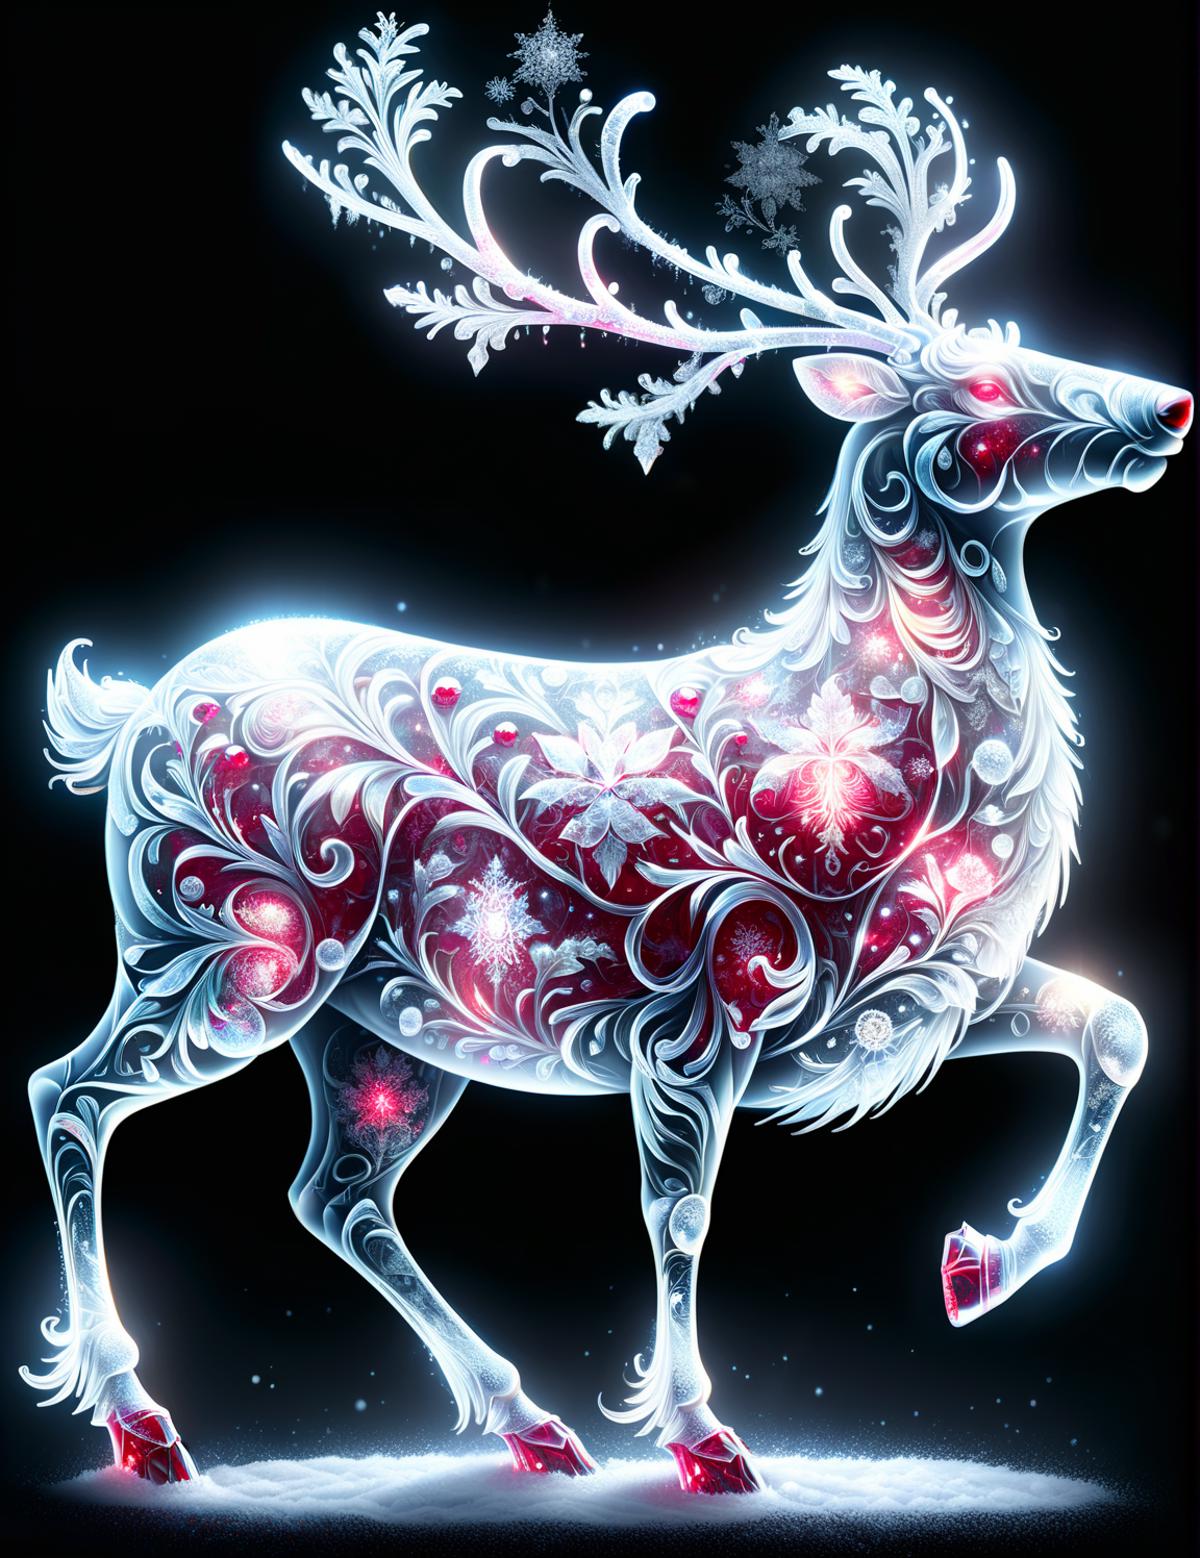 A colorful and intricate depiction of a deer in a forest, with its antlers adorned in red and white, and the surrounding environment decorated with stars, flowers, and snowflakes.